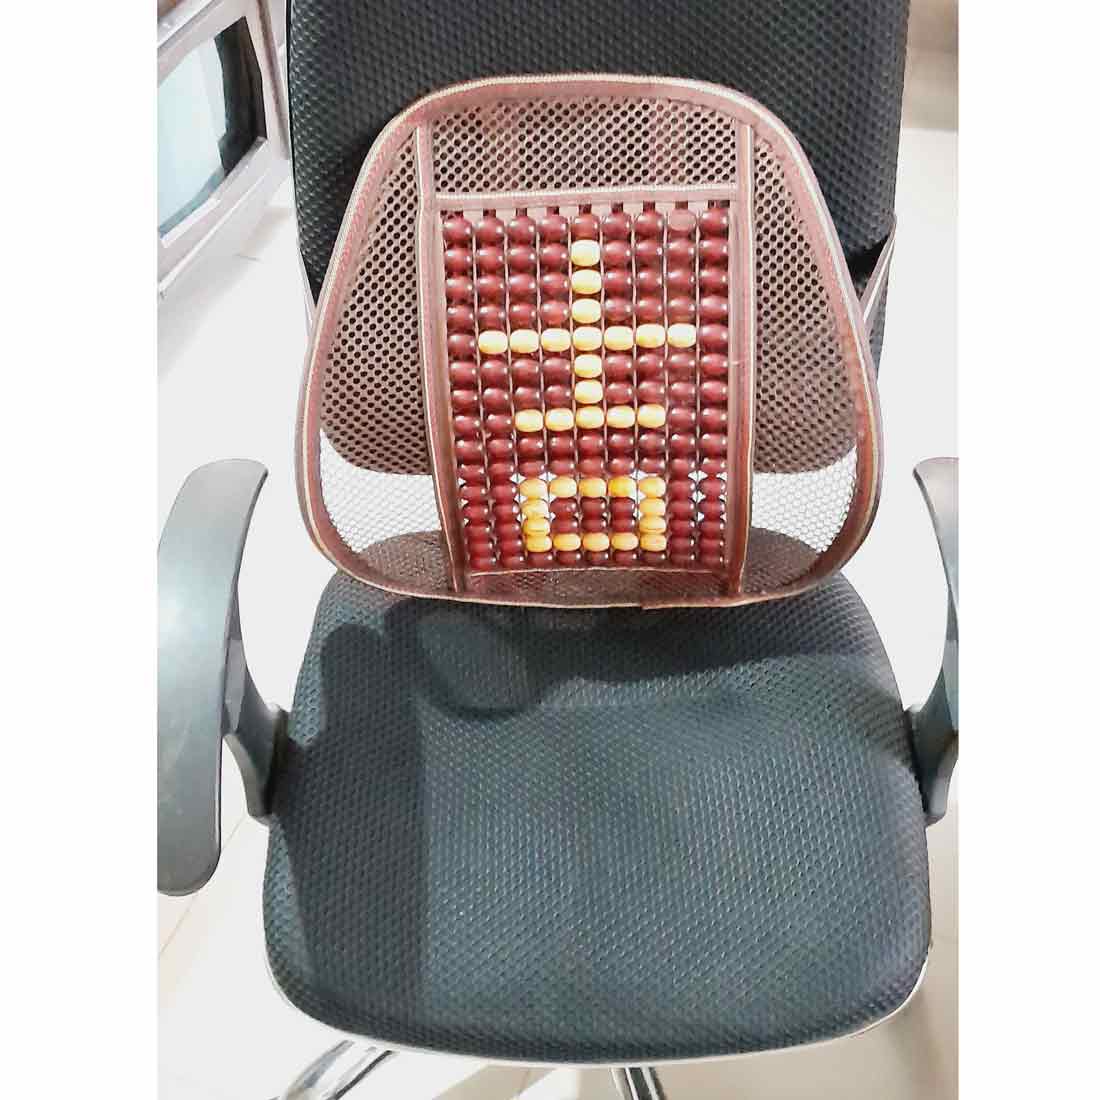 Back Support for Office Chair